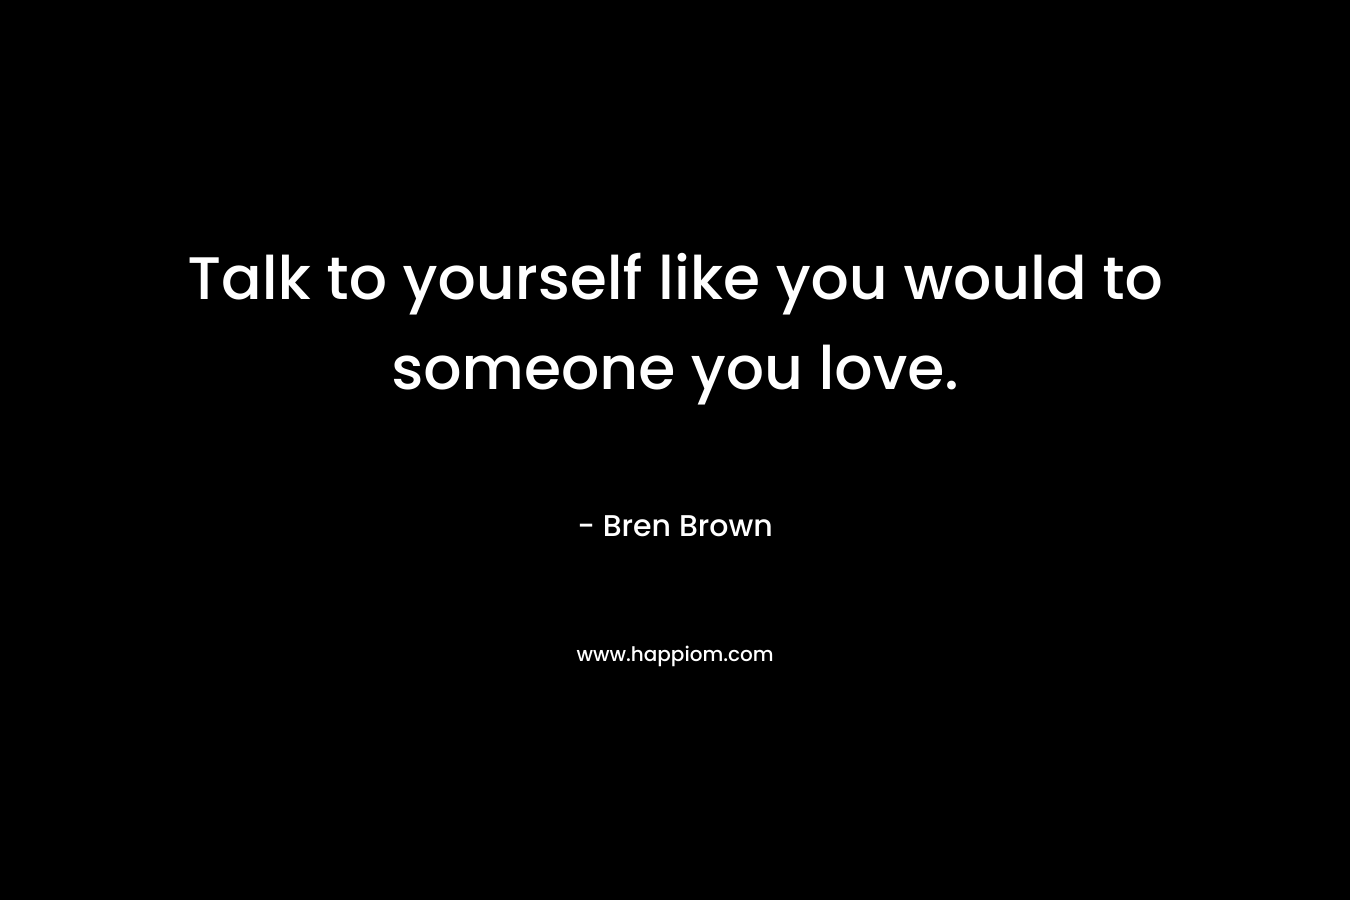 Talk to yourself like you would to someone you love.